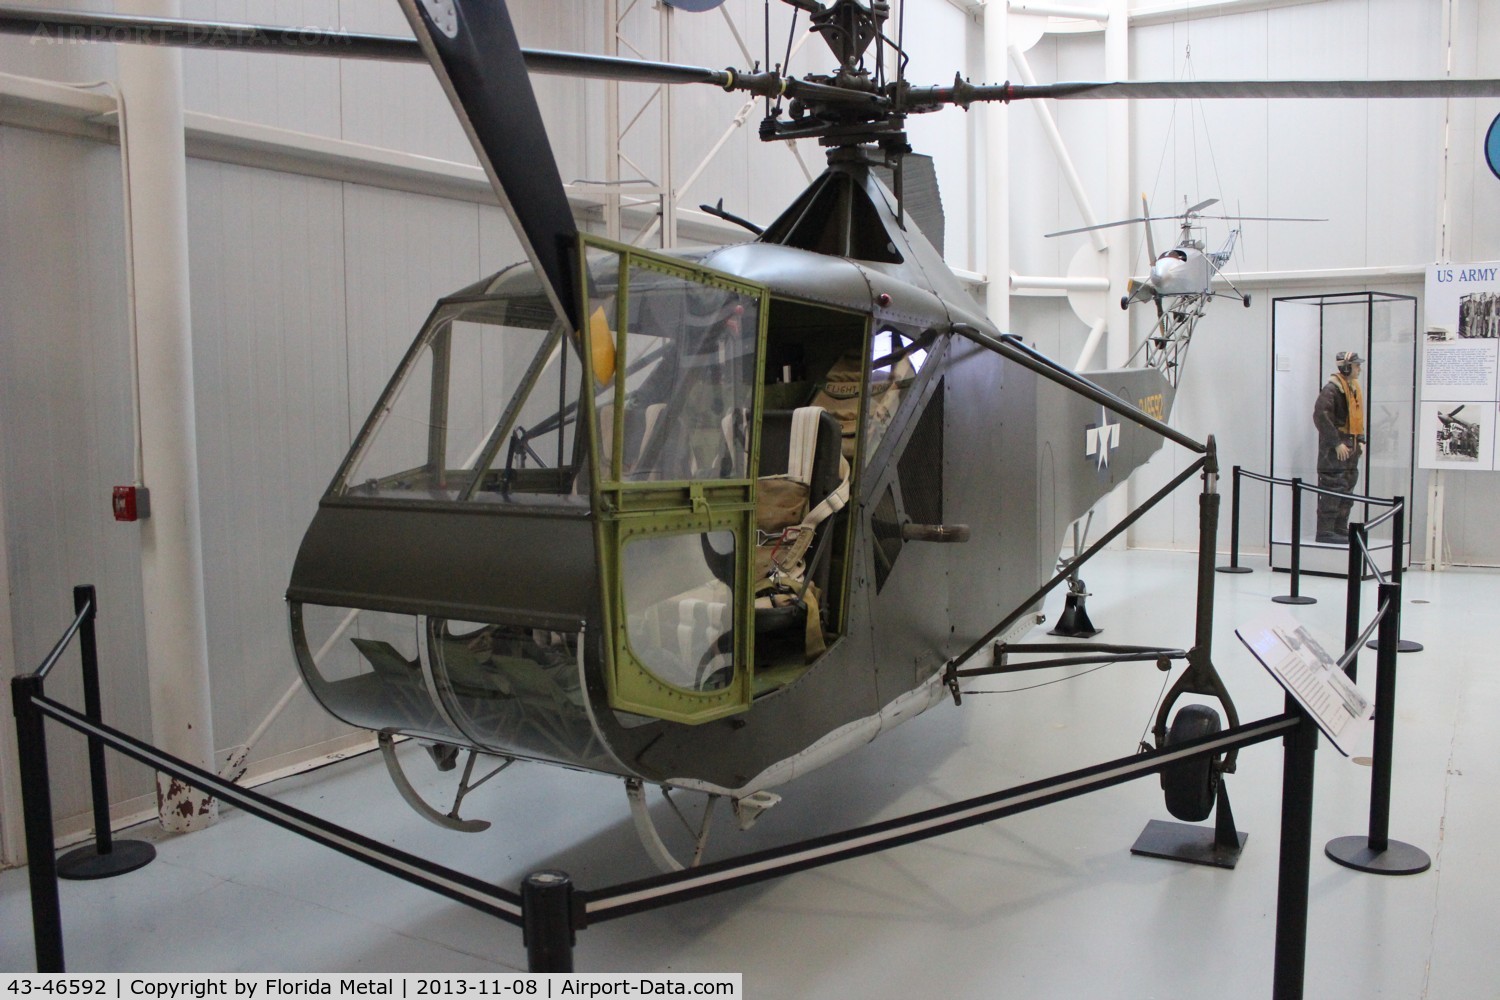 43-46592, 1943 Sikorsky R-4B Hoverfly C/N 136, R-4B Hoverfly at Army Aviation Museum